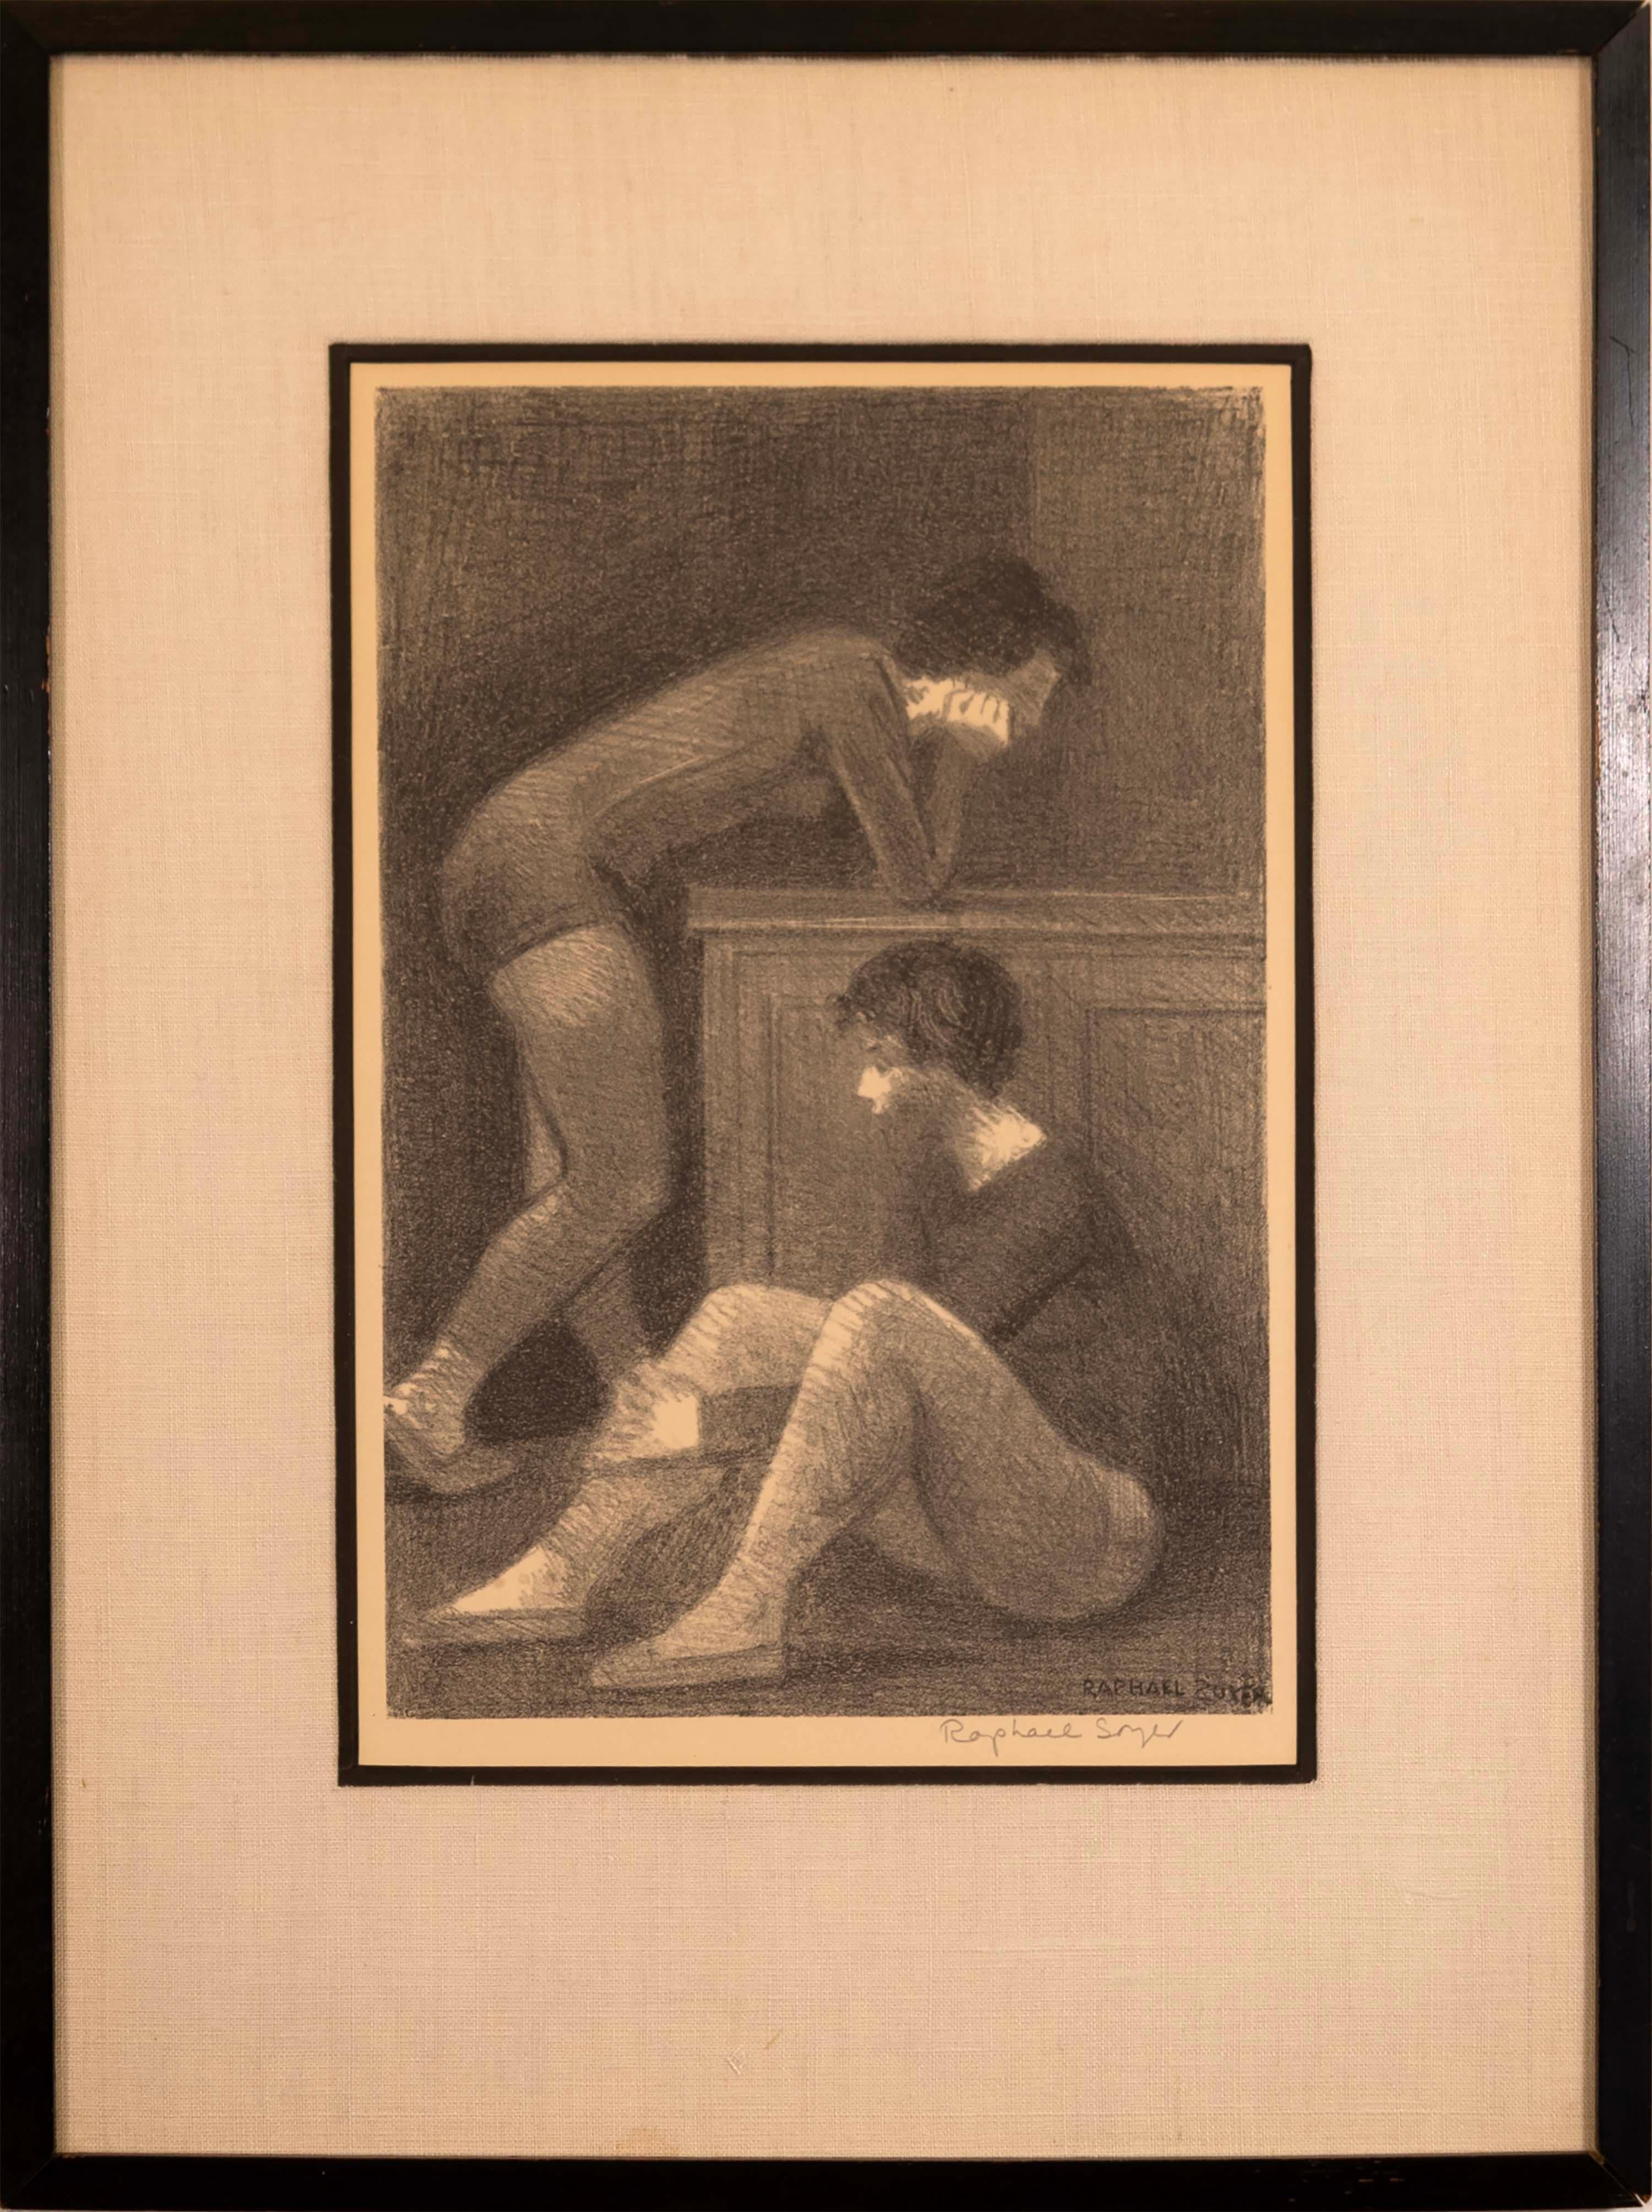 A pensive lithograph on paper titled “Dancers” by American artist Raphael Soyer. Hand signed in pencil on the bottom right. Published by Associated American Artists, New York in 1954. Raphael Soyer (1899-1987) was a painter, draughtsman, and